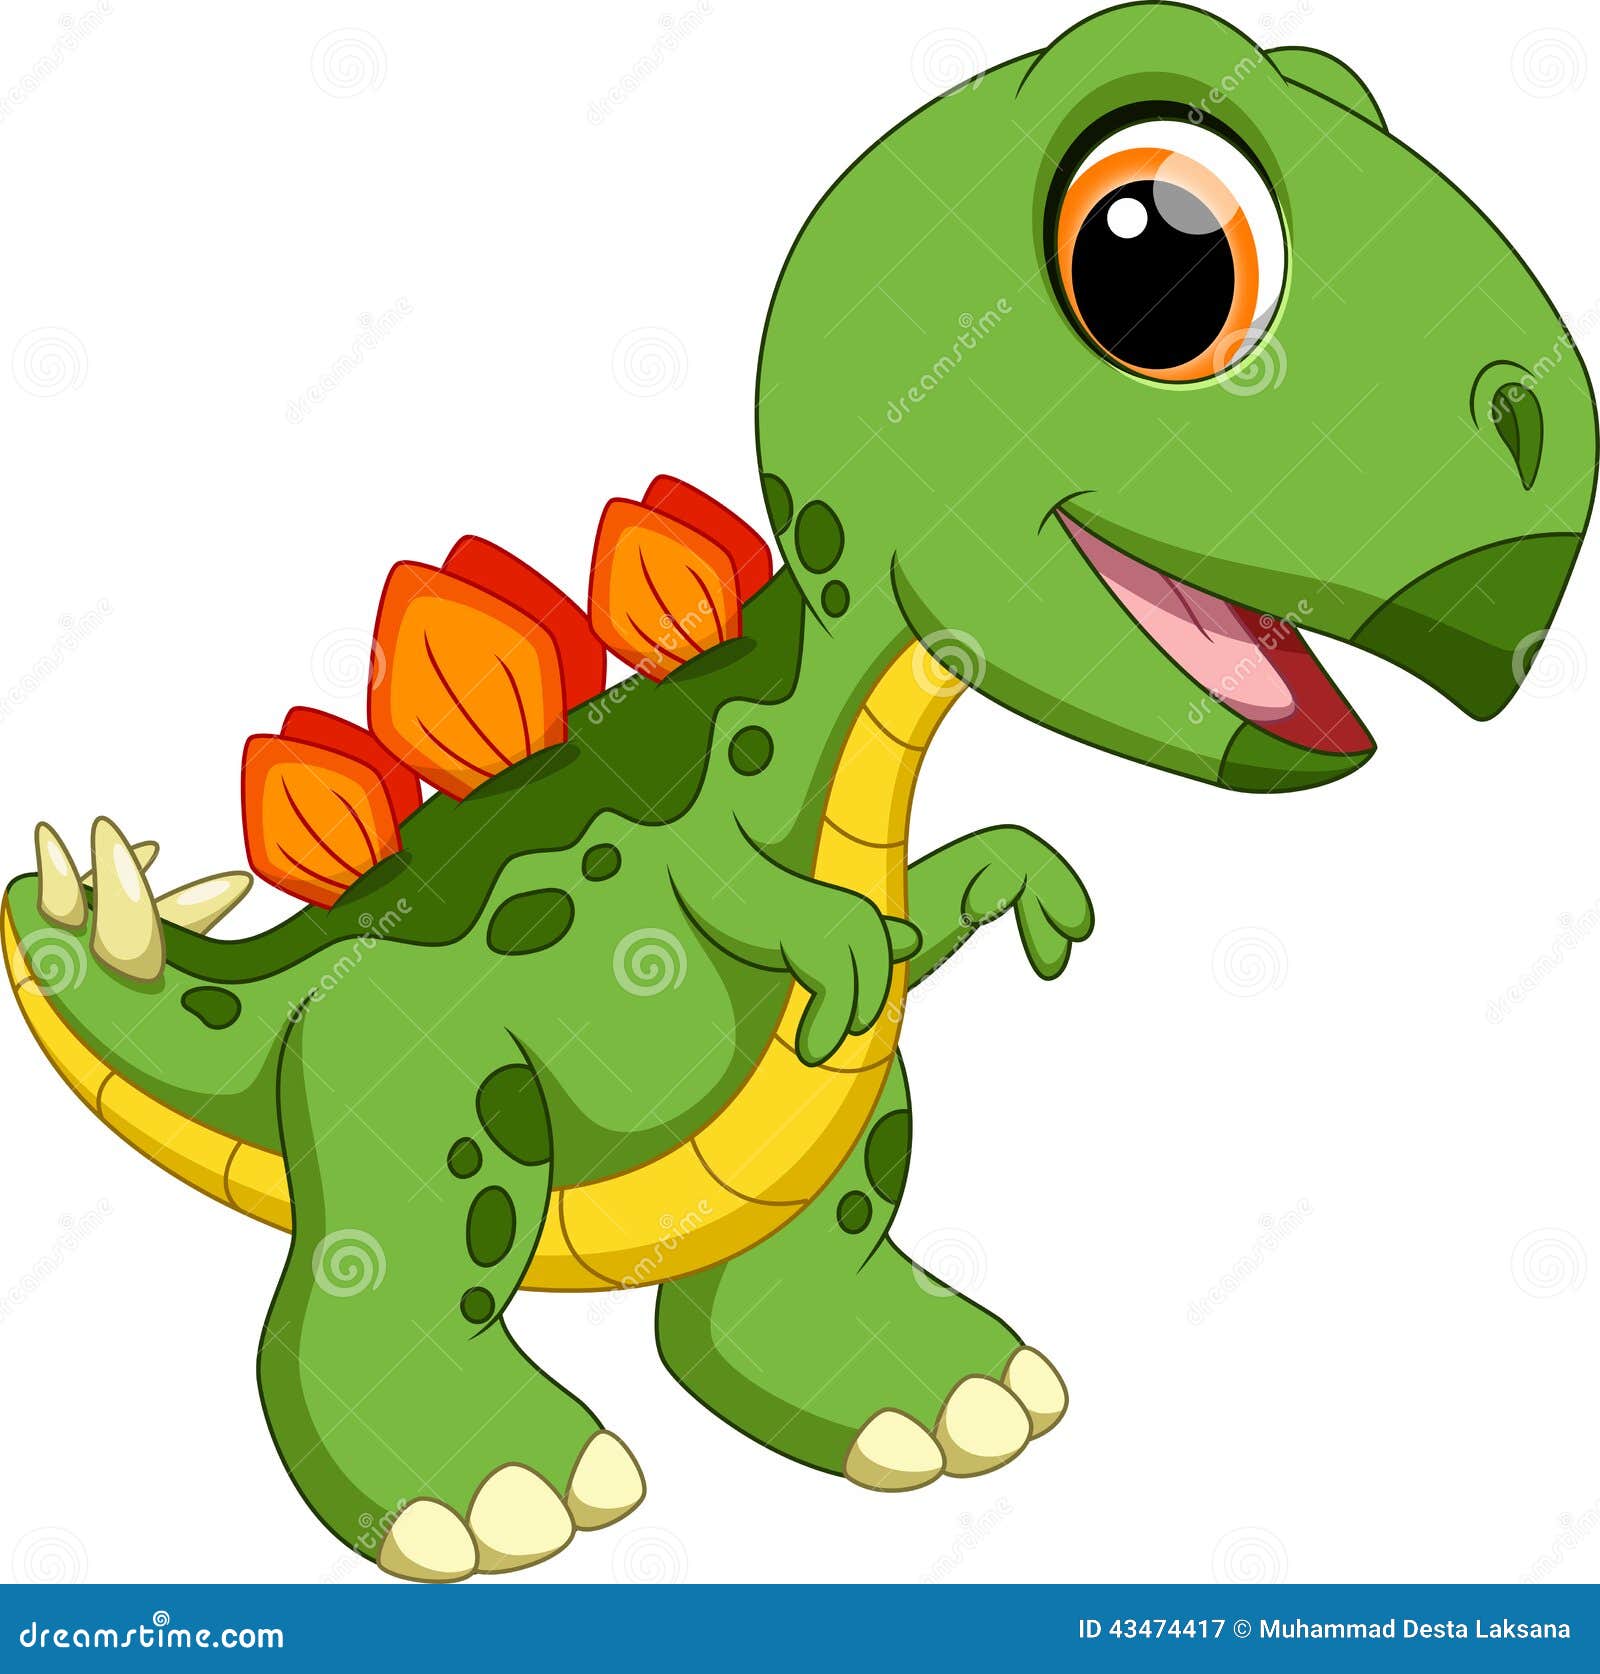 Two Cute And Funny Baby Dinosaur Characters Stegosaurus And Pterodactyloidea  Stock Illustration - Download Image Now - iStock